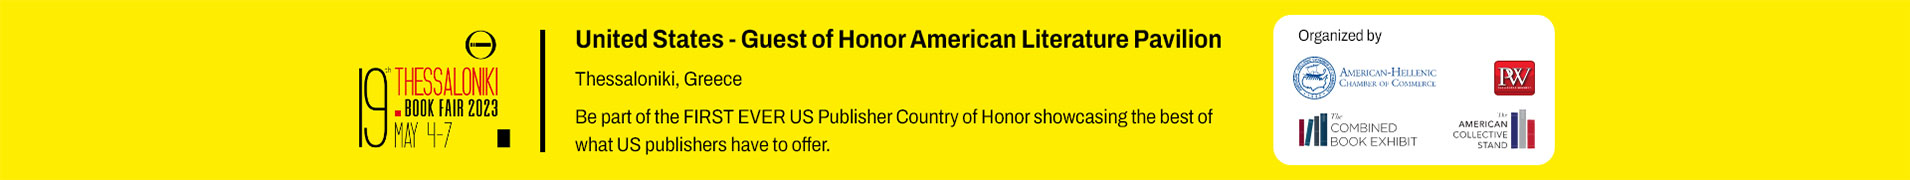 United States Guest of Honor American Literature Pavilion Thessaloniki, Greece